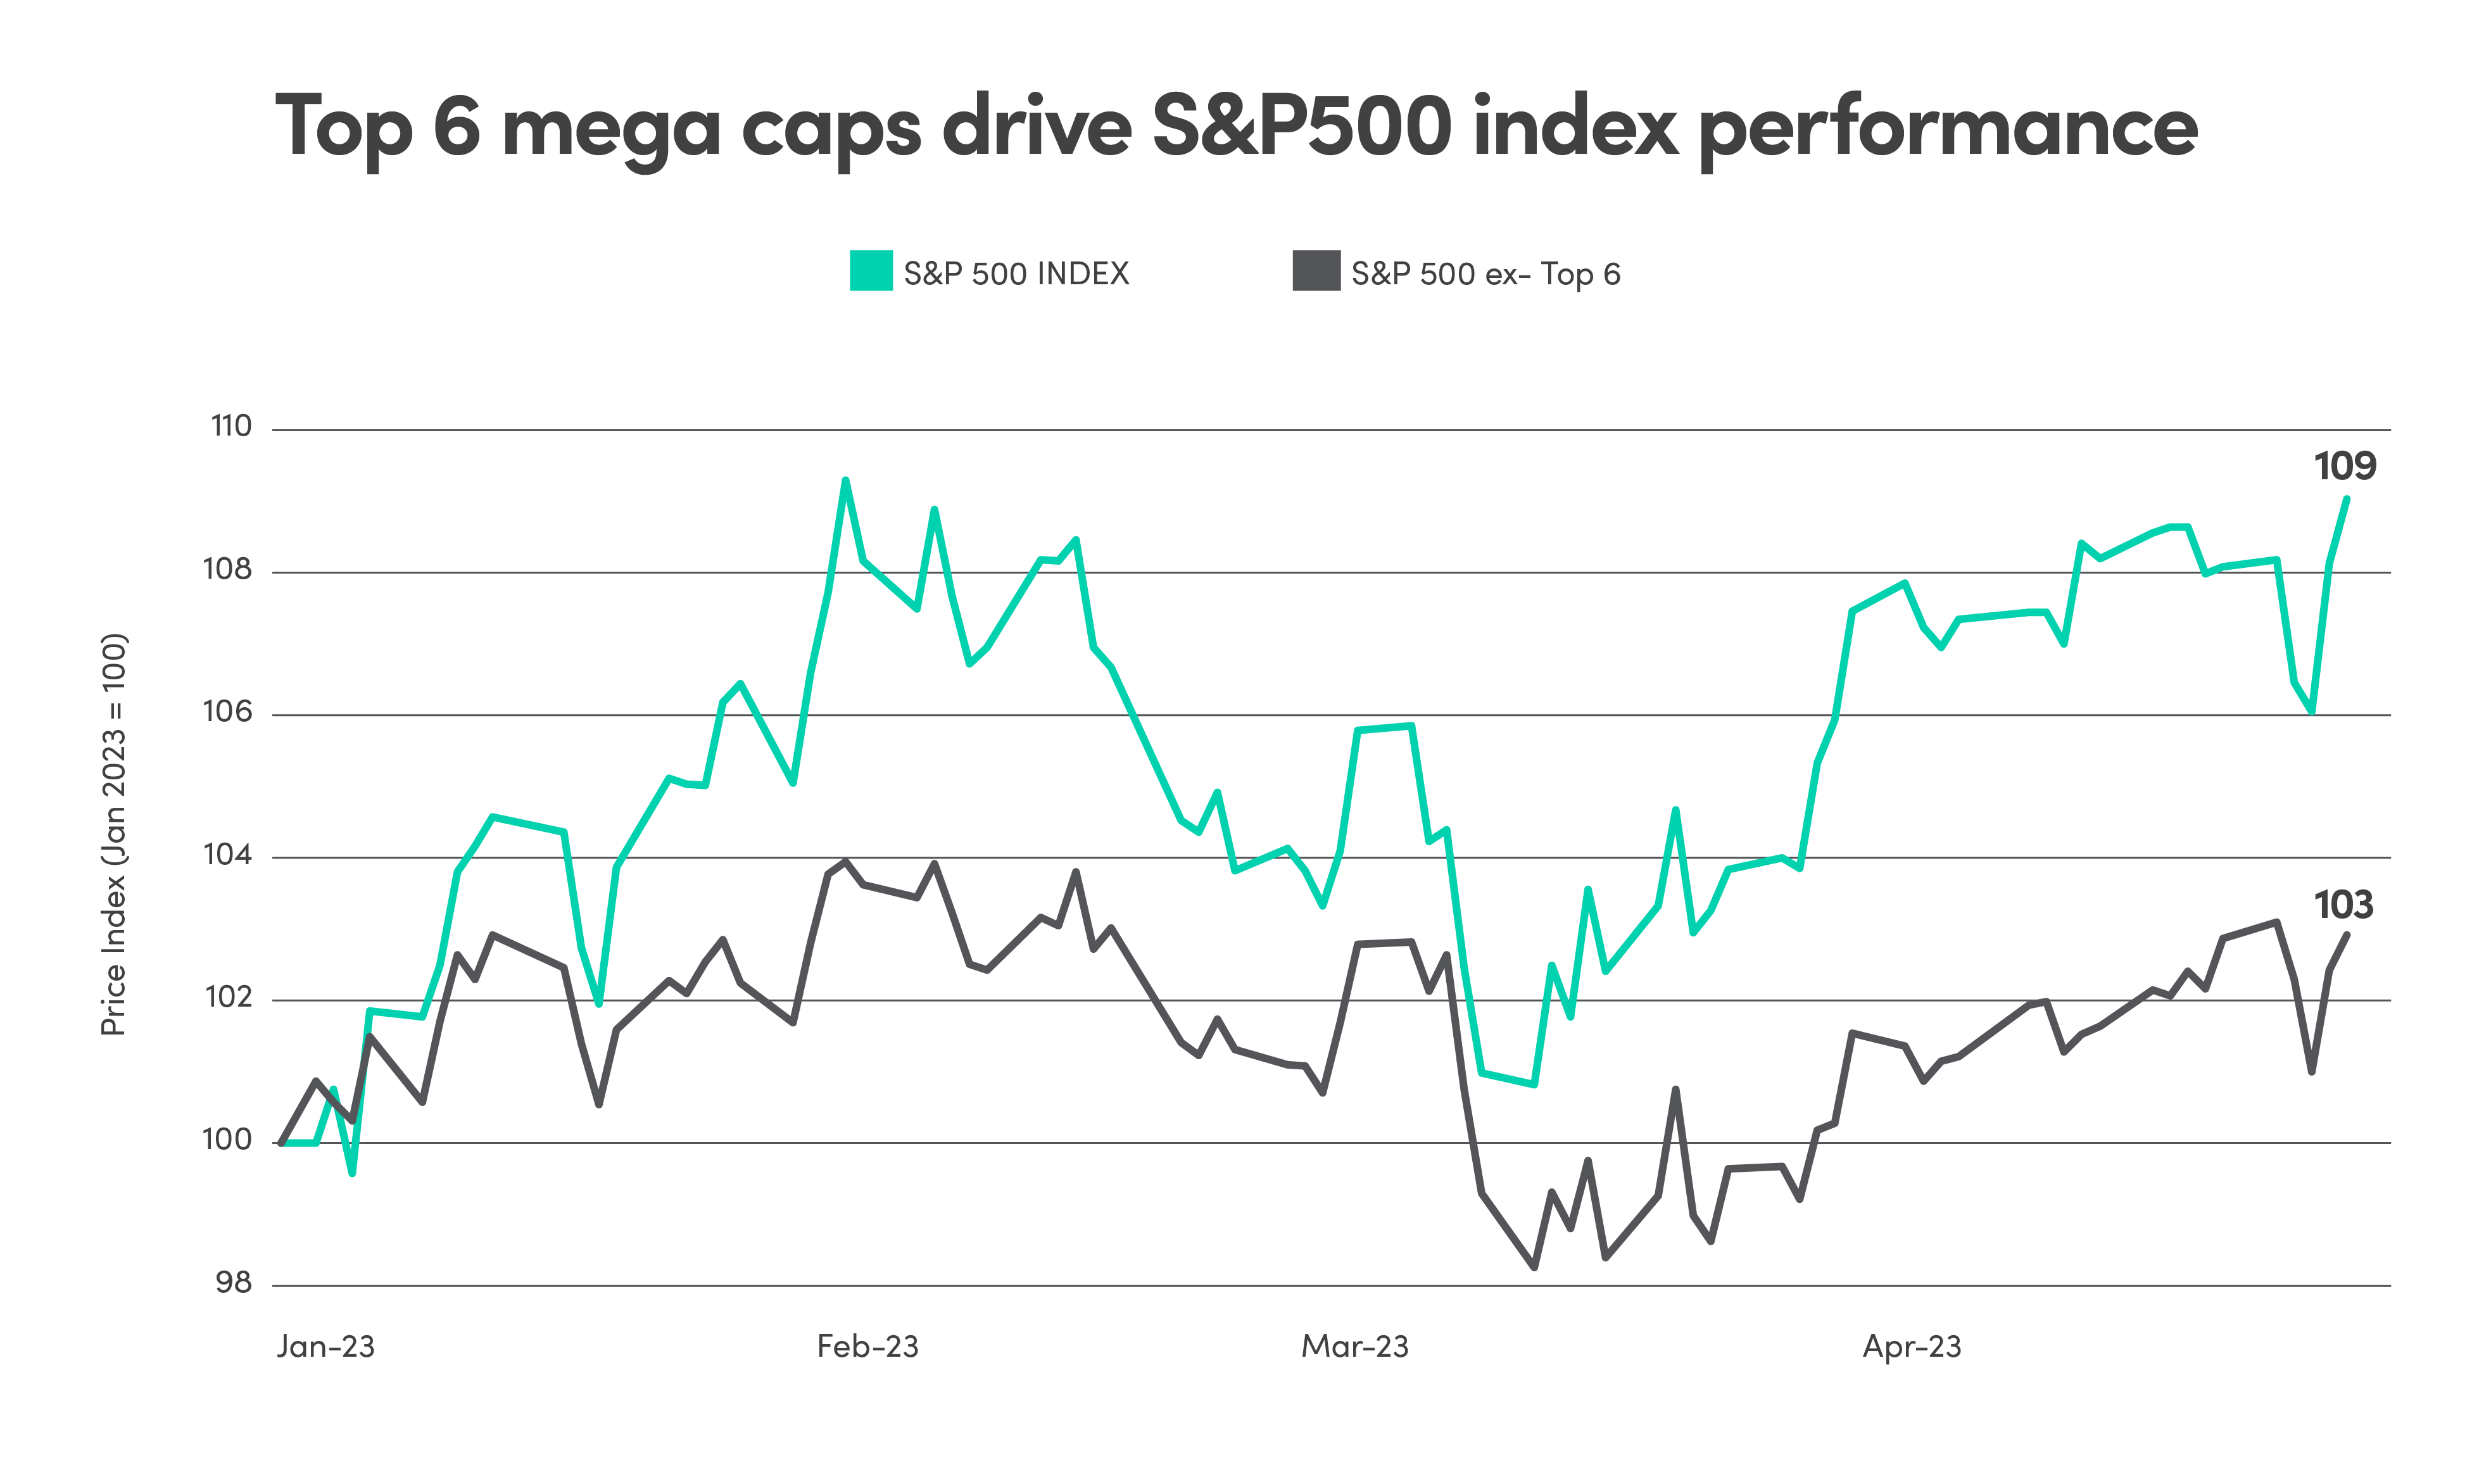 Line graph comparing the S&P 500 Index performance with and without the top 6 mega cap companies, from January 2023 to April 2023